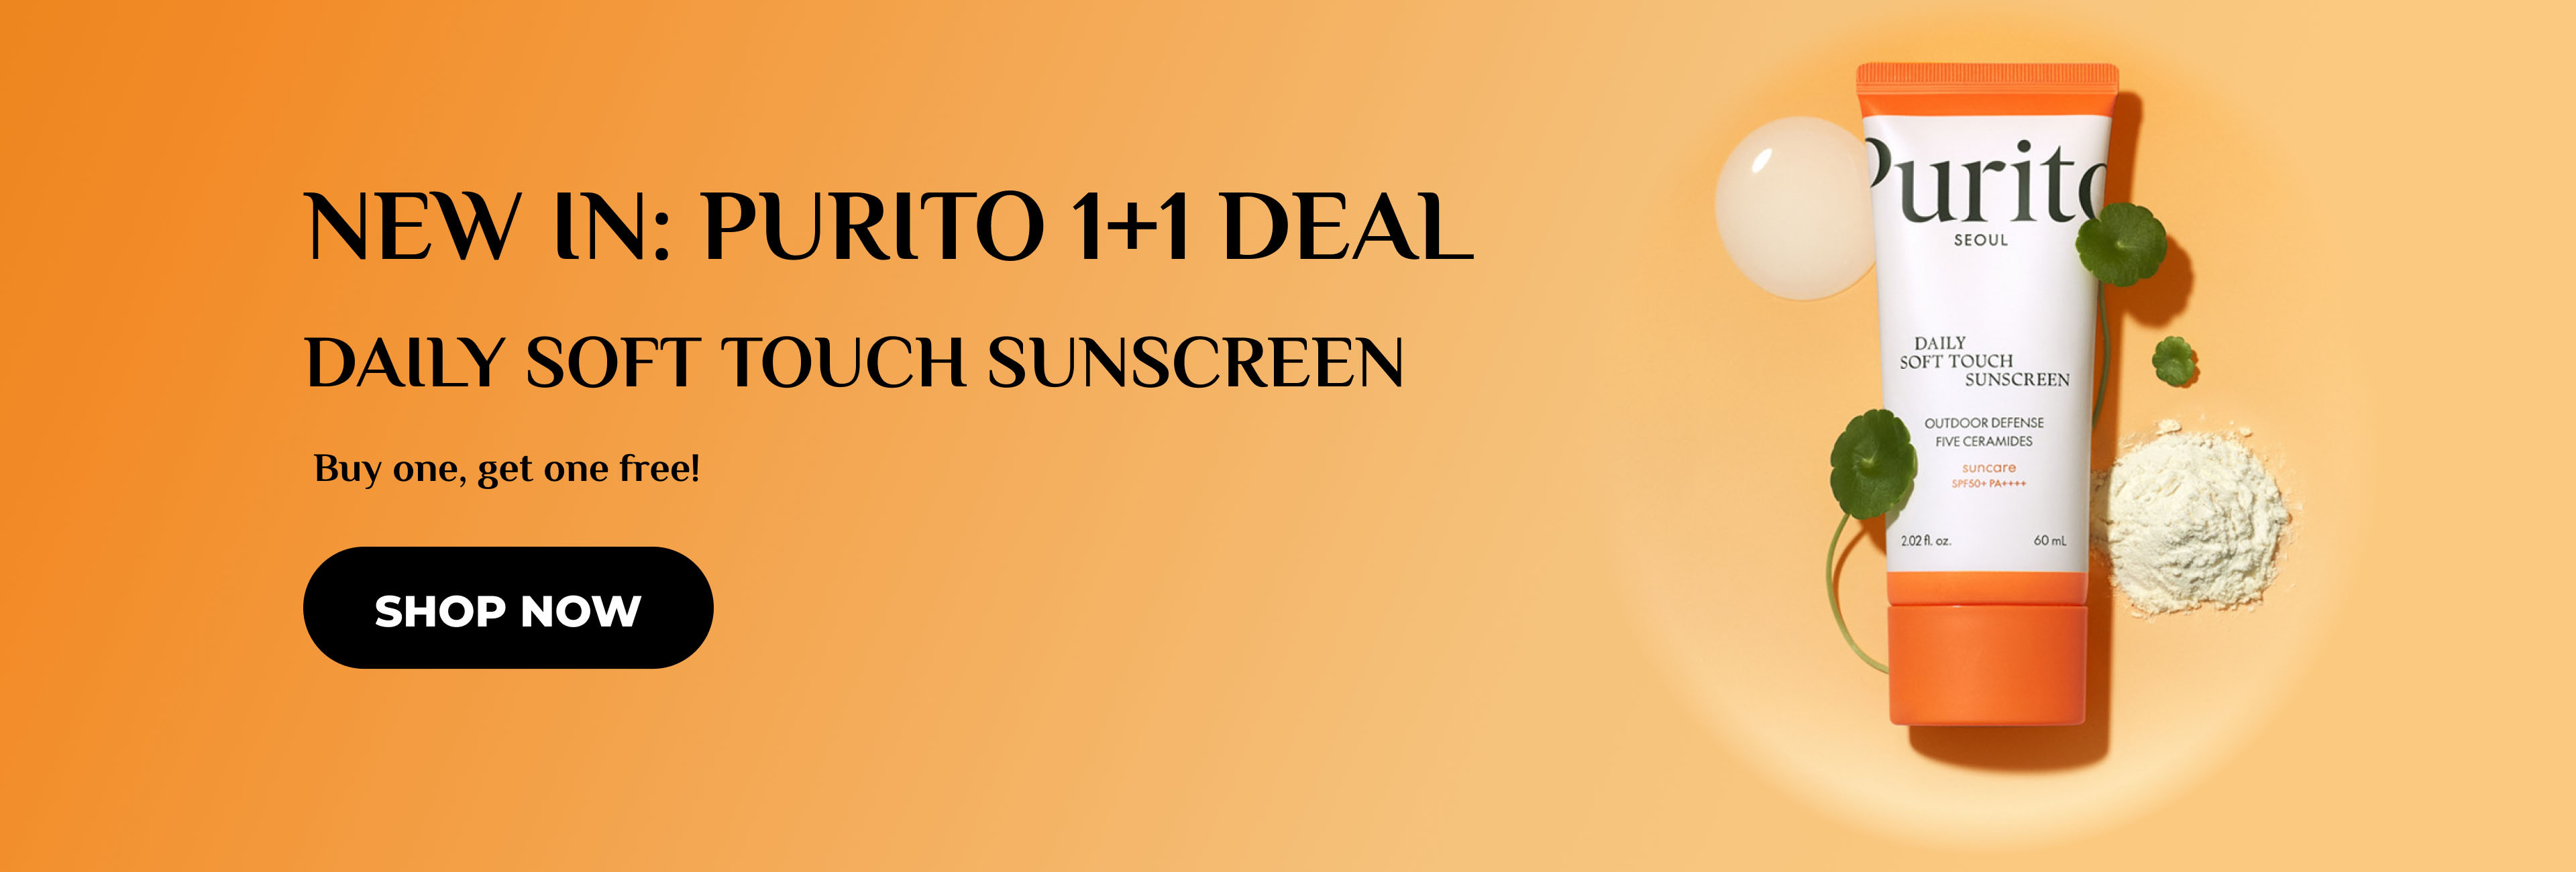 Purito Special offer